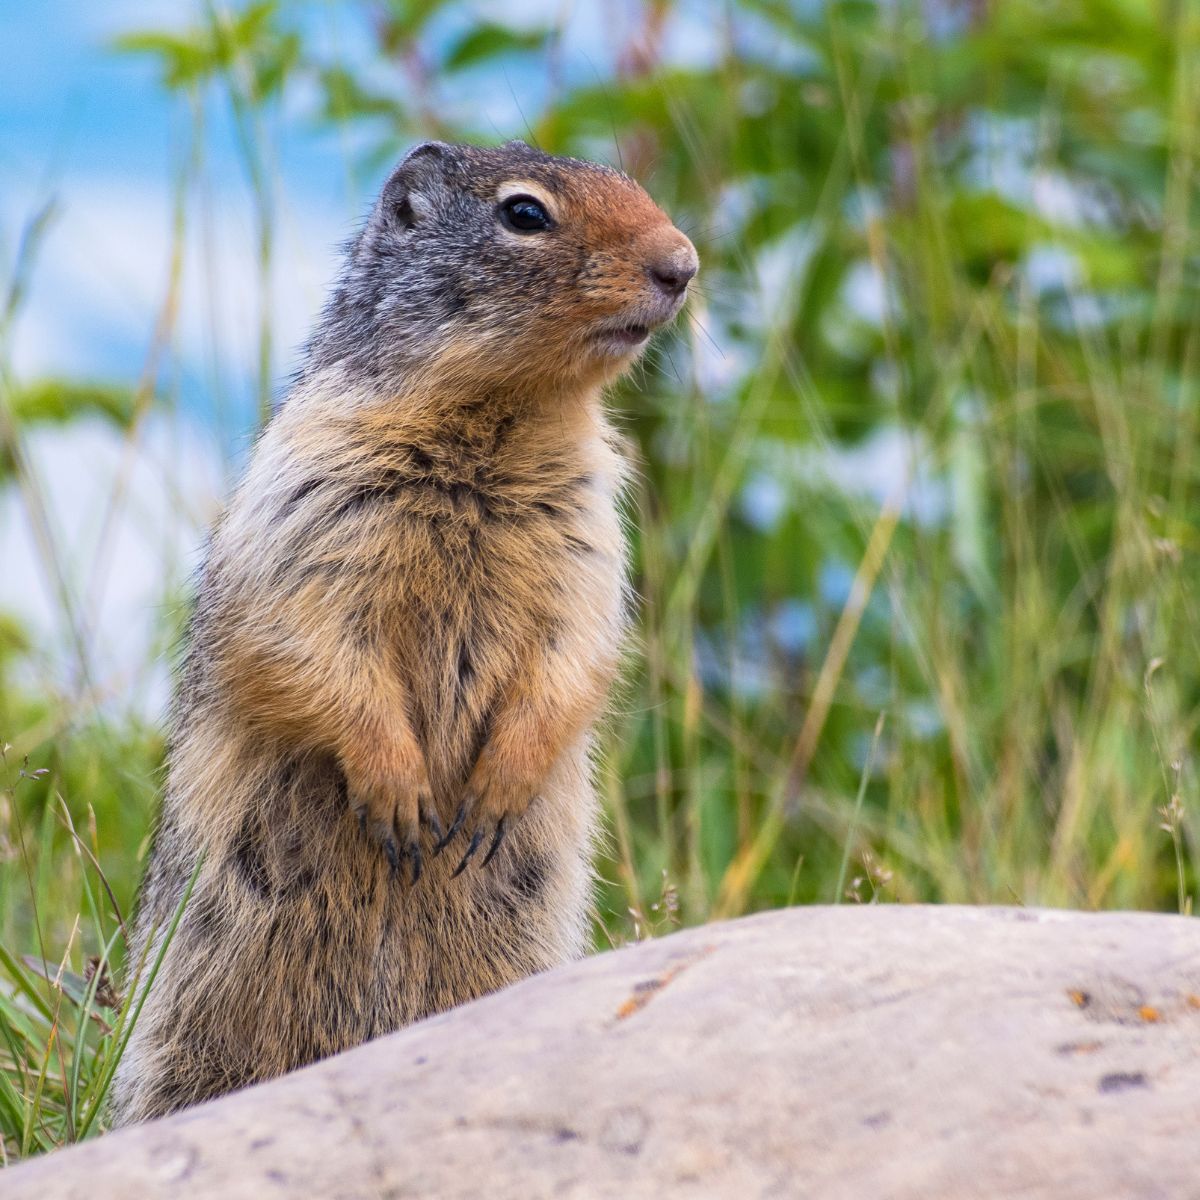 Gopher standing behind a large rock.